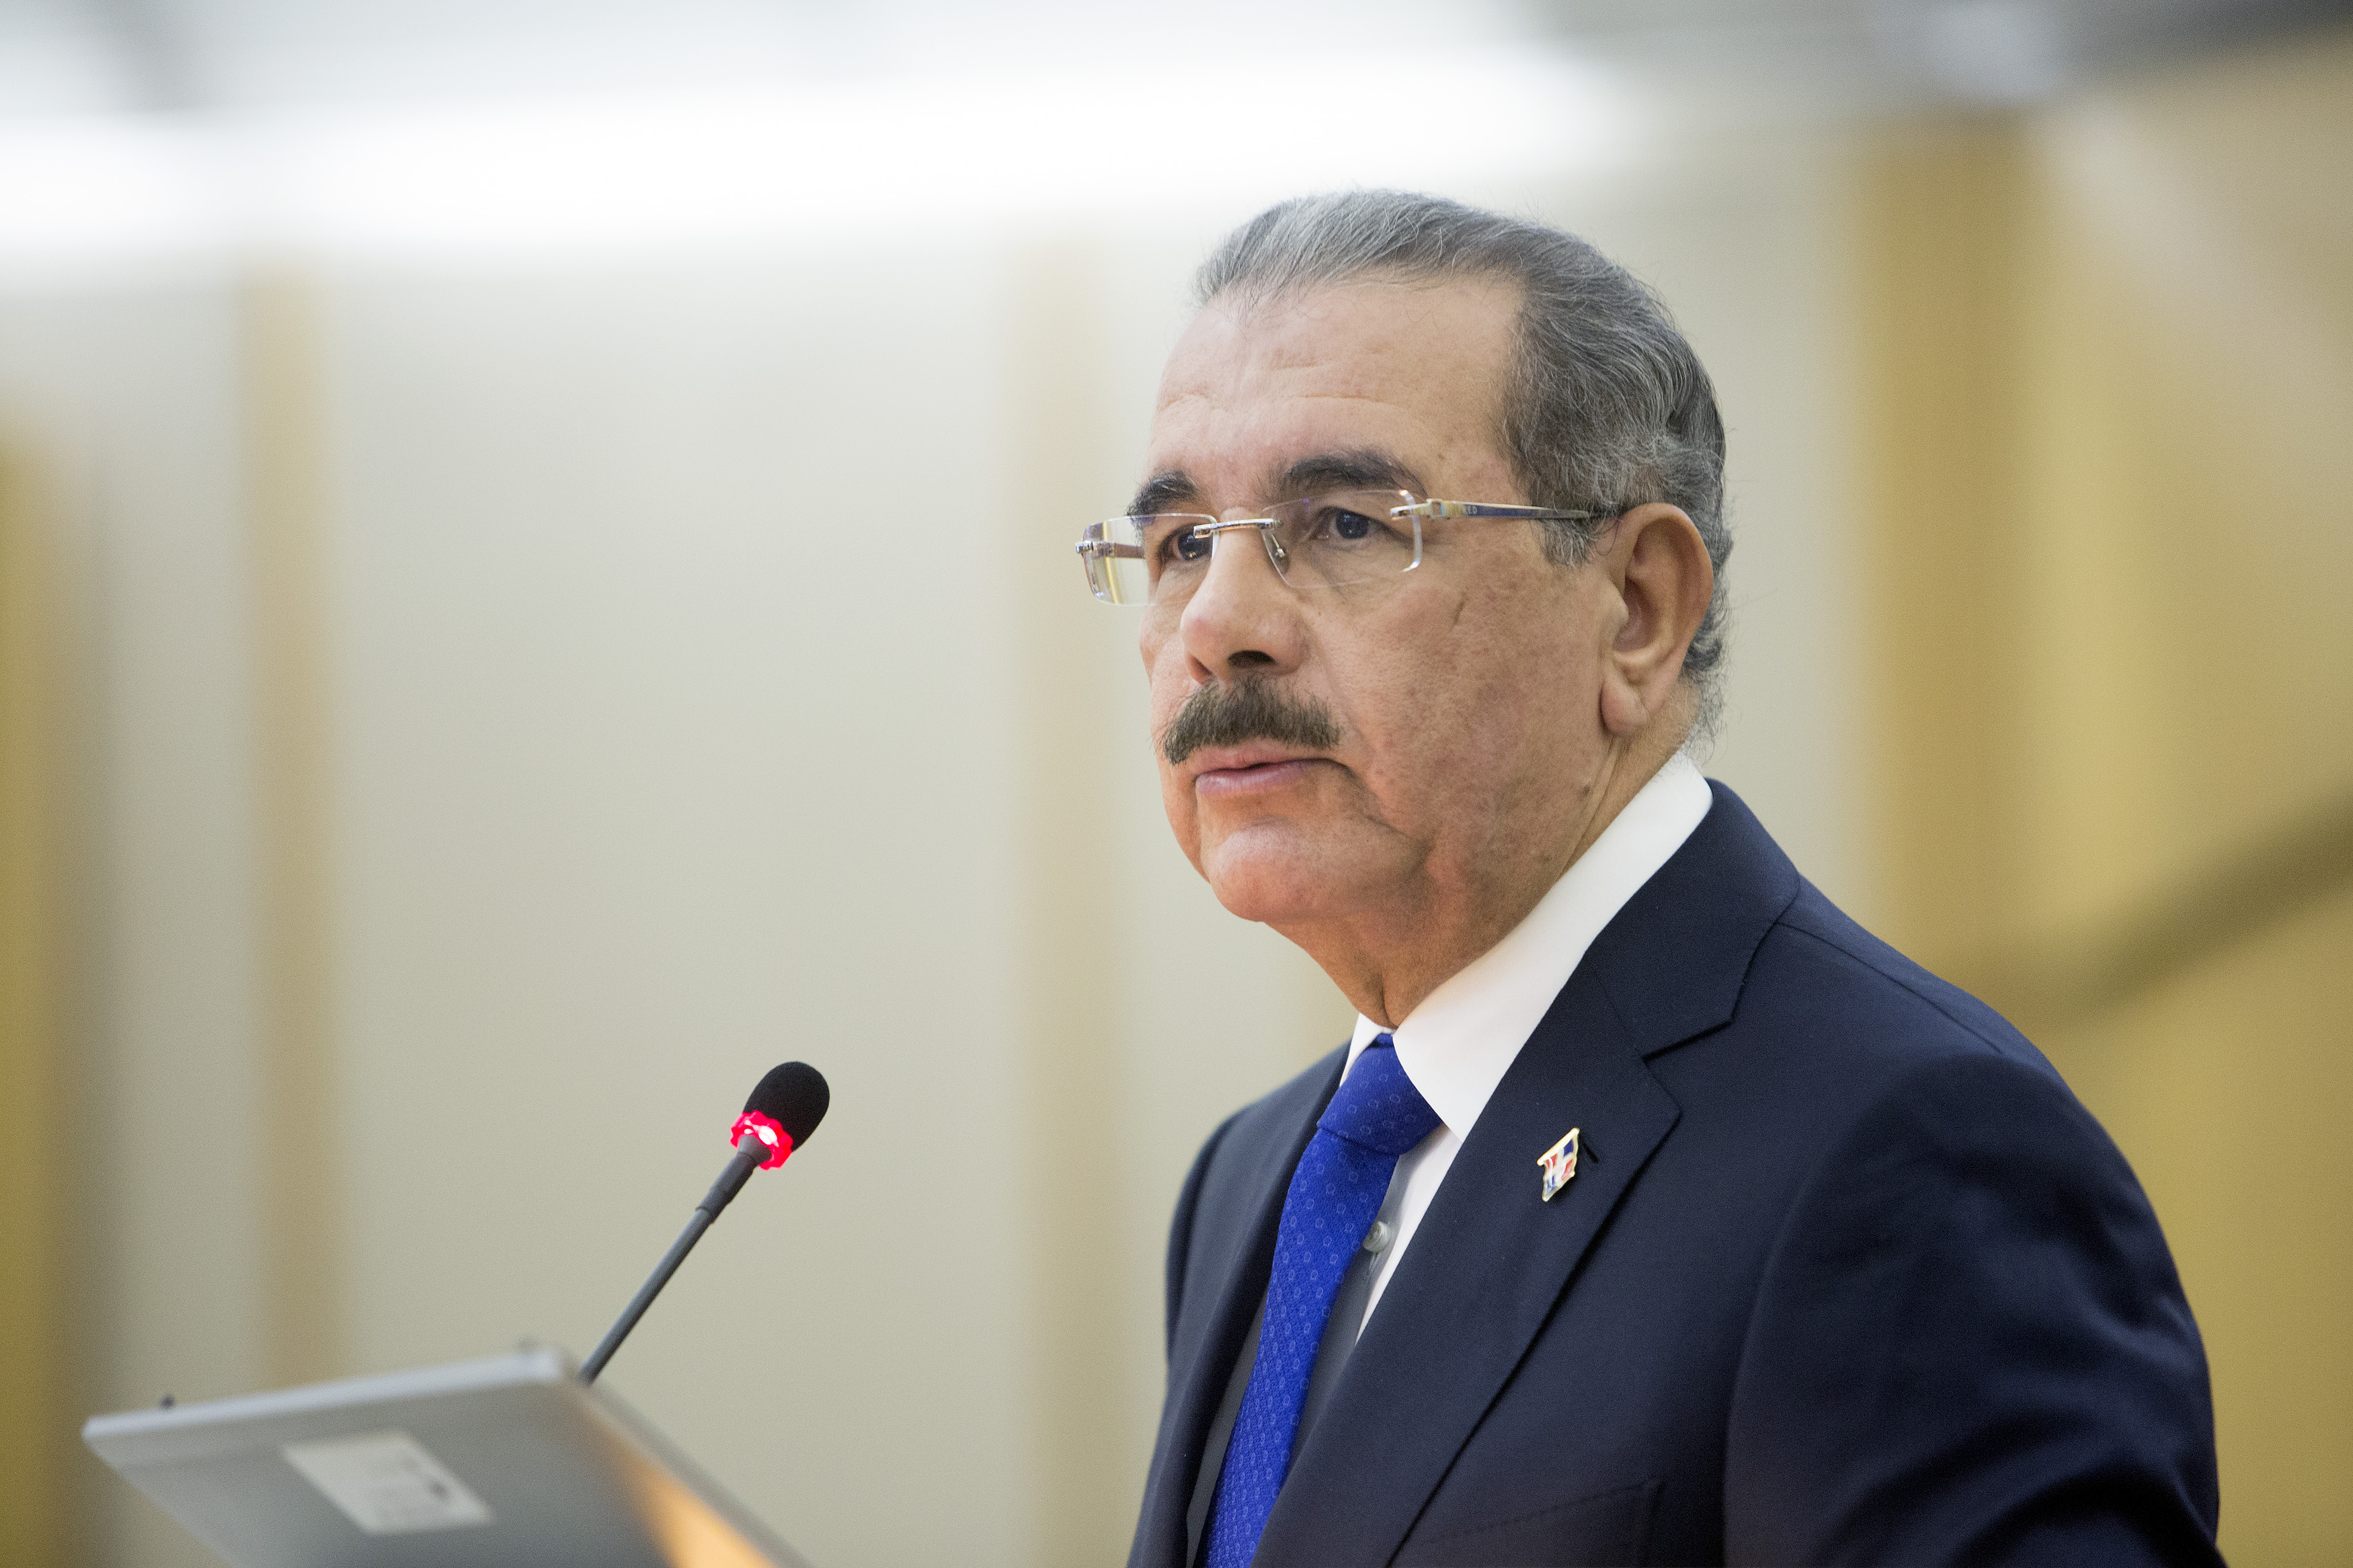 President Danilo Medina (photo credit: The Food and Agriculture Organization of the United Nations/flickr)